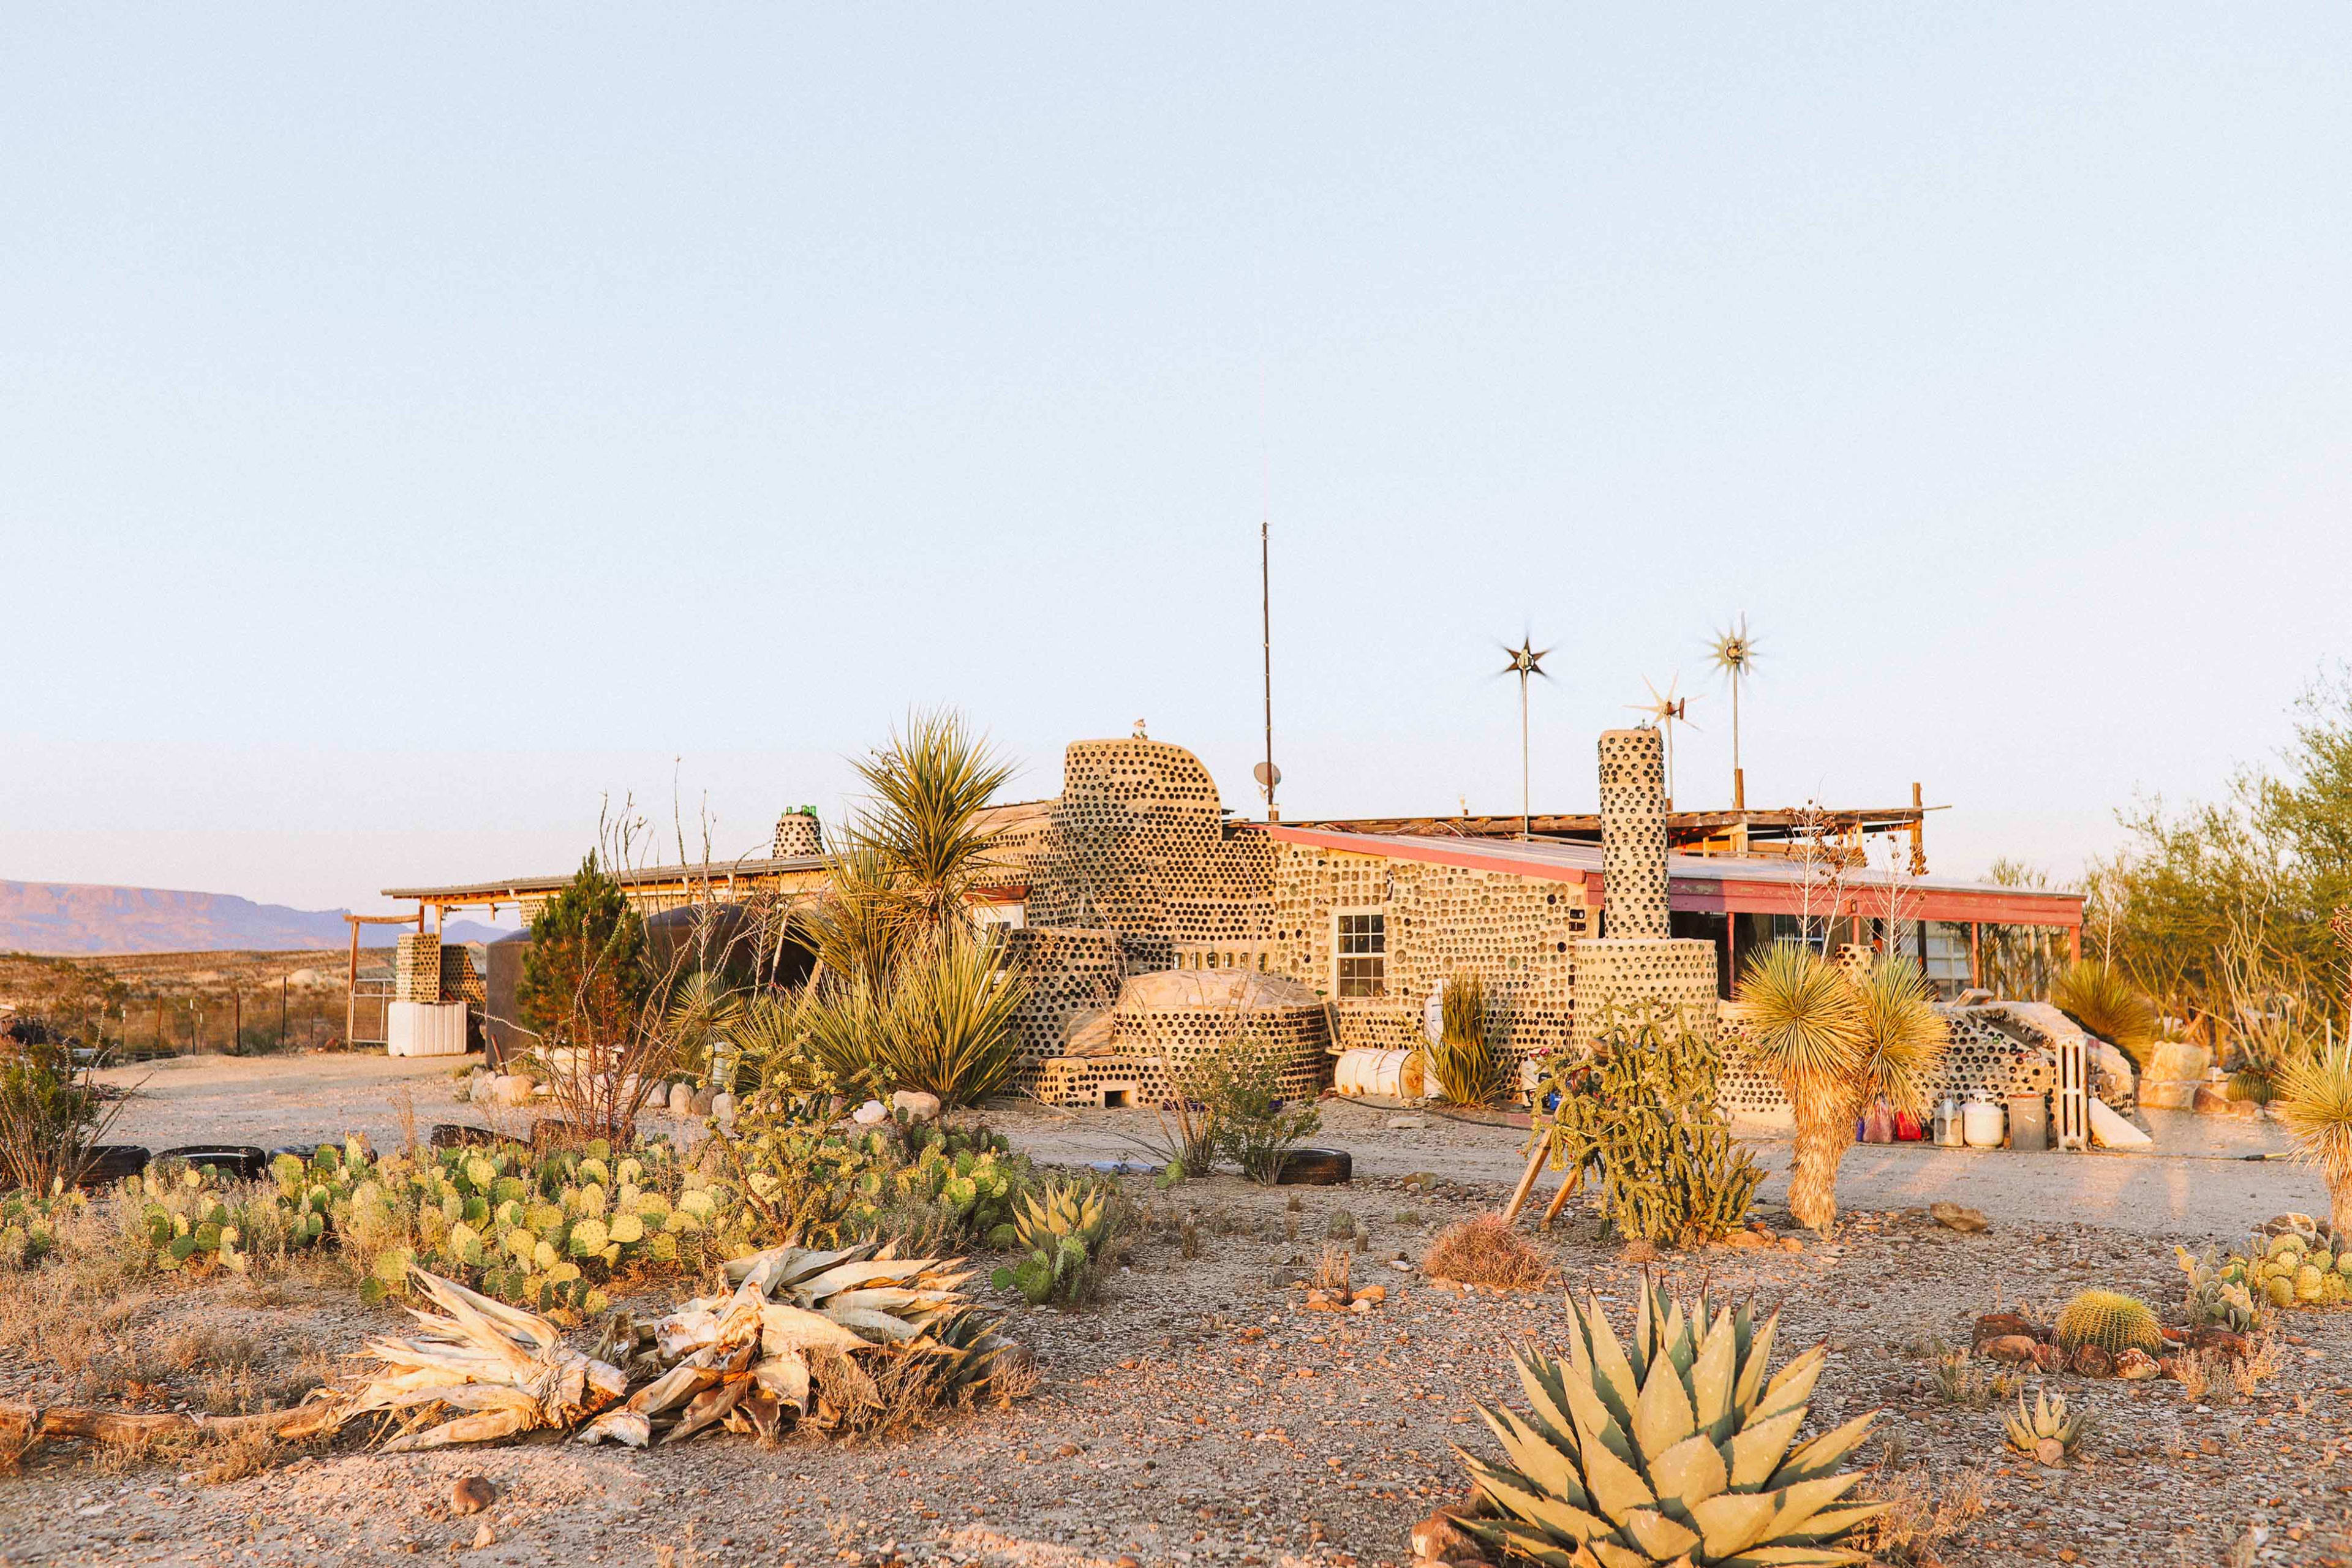 Robert and Debbie's beautiful Eco-Ranch, built from the ground up